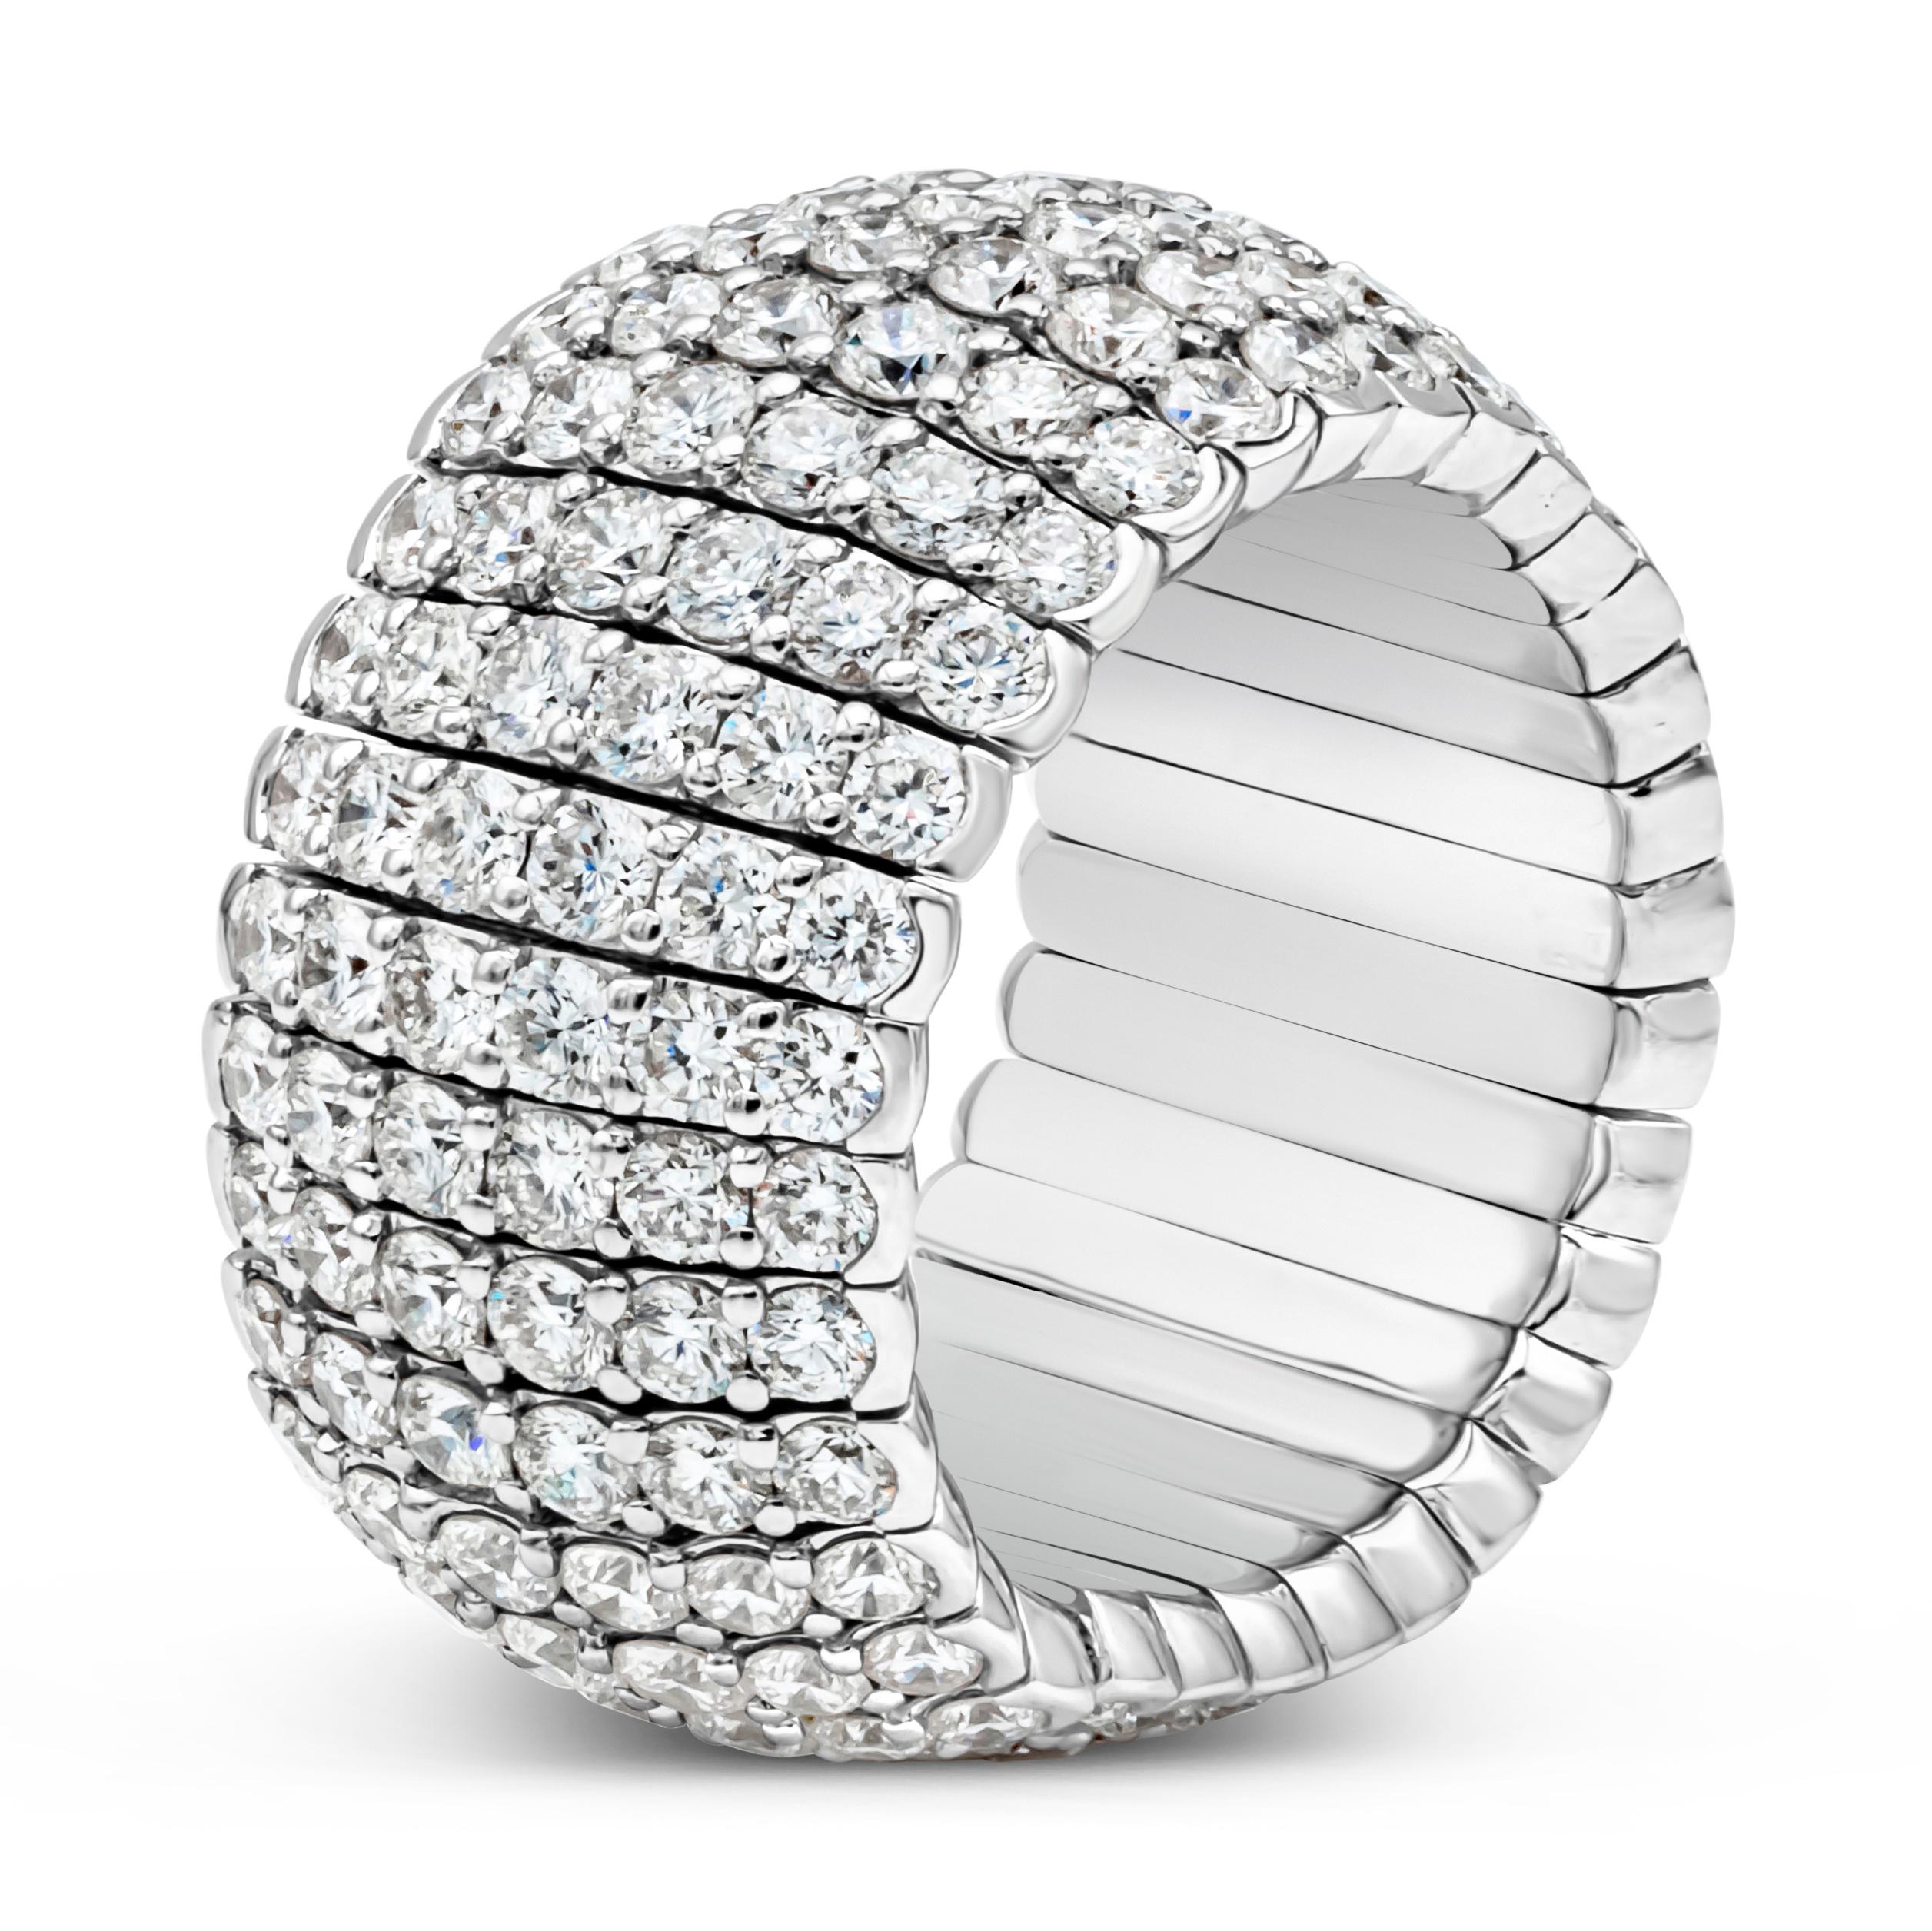 This fashionable and vibrant flexible fashion ring showcases six rows of 192 brilliant round cut diamonds weighing 4.92 carats total, set in a beautiful micro-pave set and shared prong setting. Finely made in 18k white gold. Size 6.5 US resizable